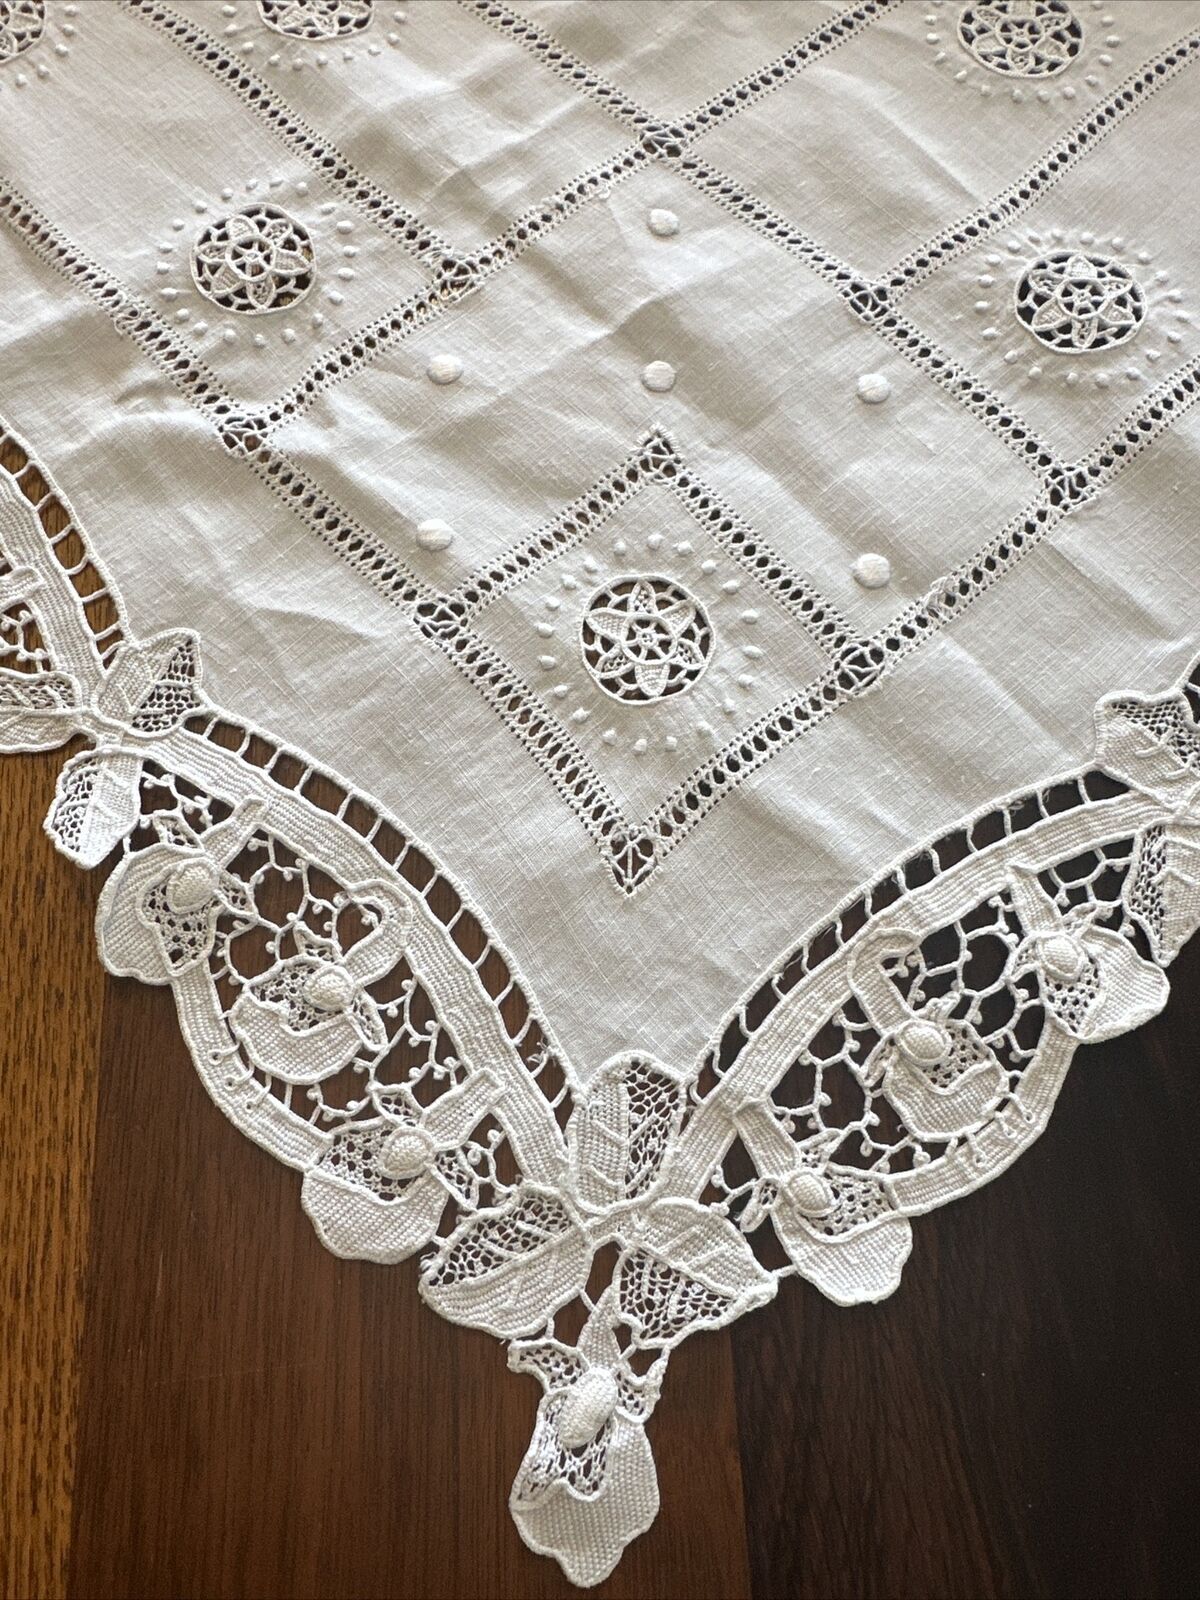 Vintage Tablecloth Whitework Open Work Lace Embroidered 59x59